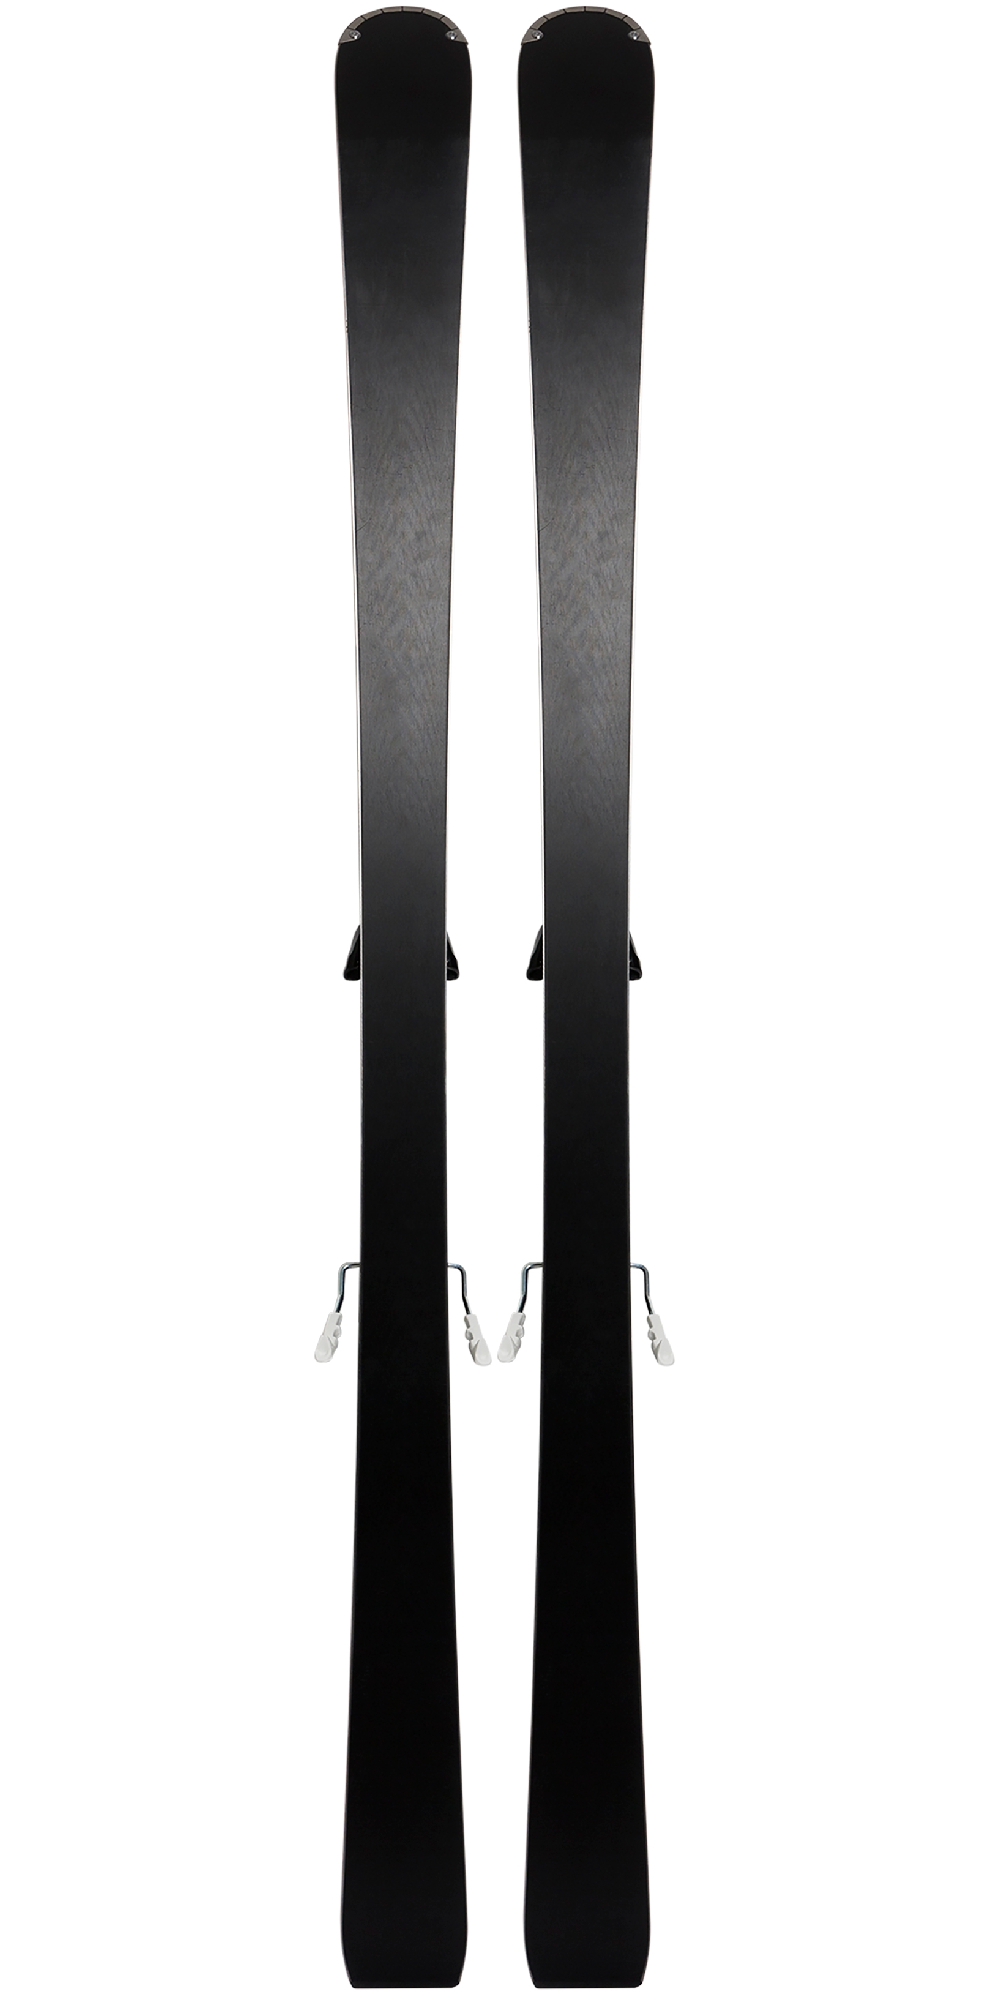 ATOMIC SKIS REDSTER S7 + FT 12 GW HOMME